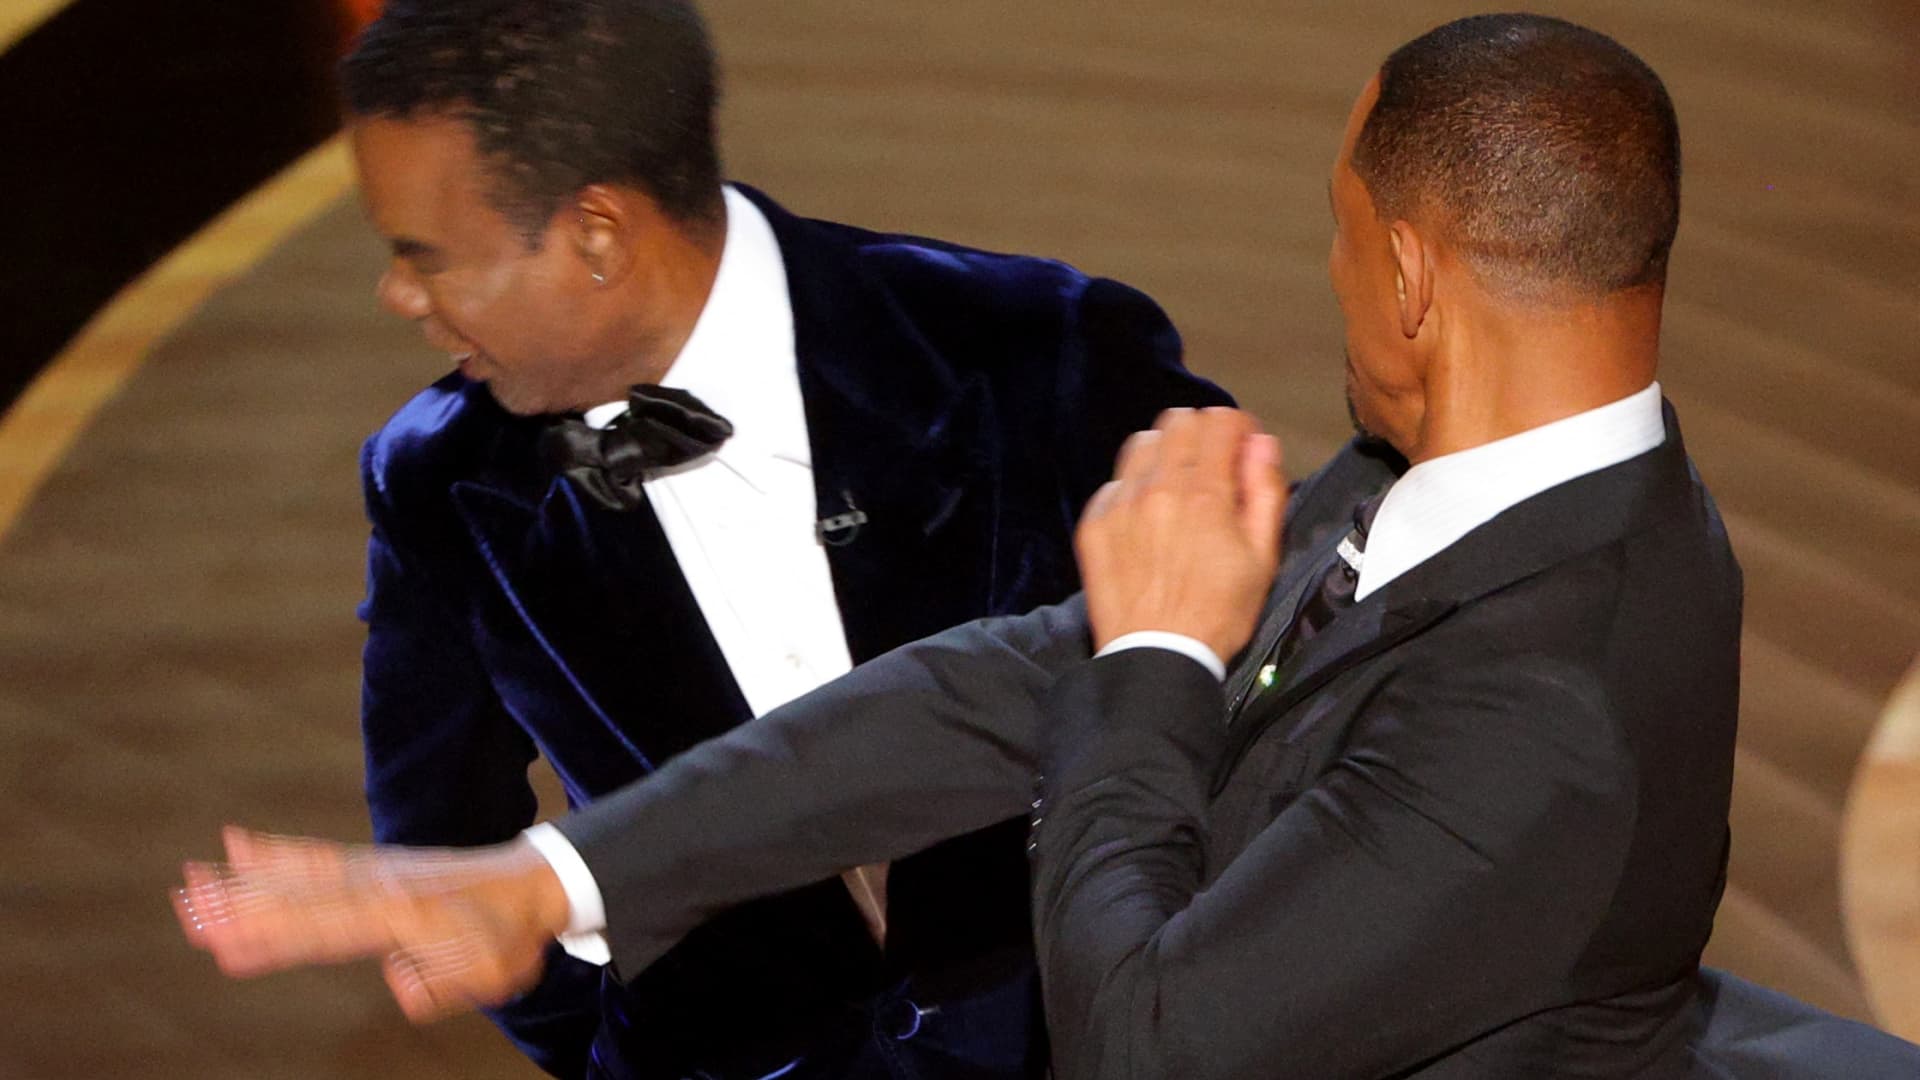 Will Smith refused to leave Oscars, faces discipline for Chris Rock slap